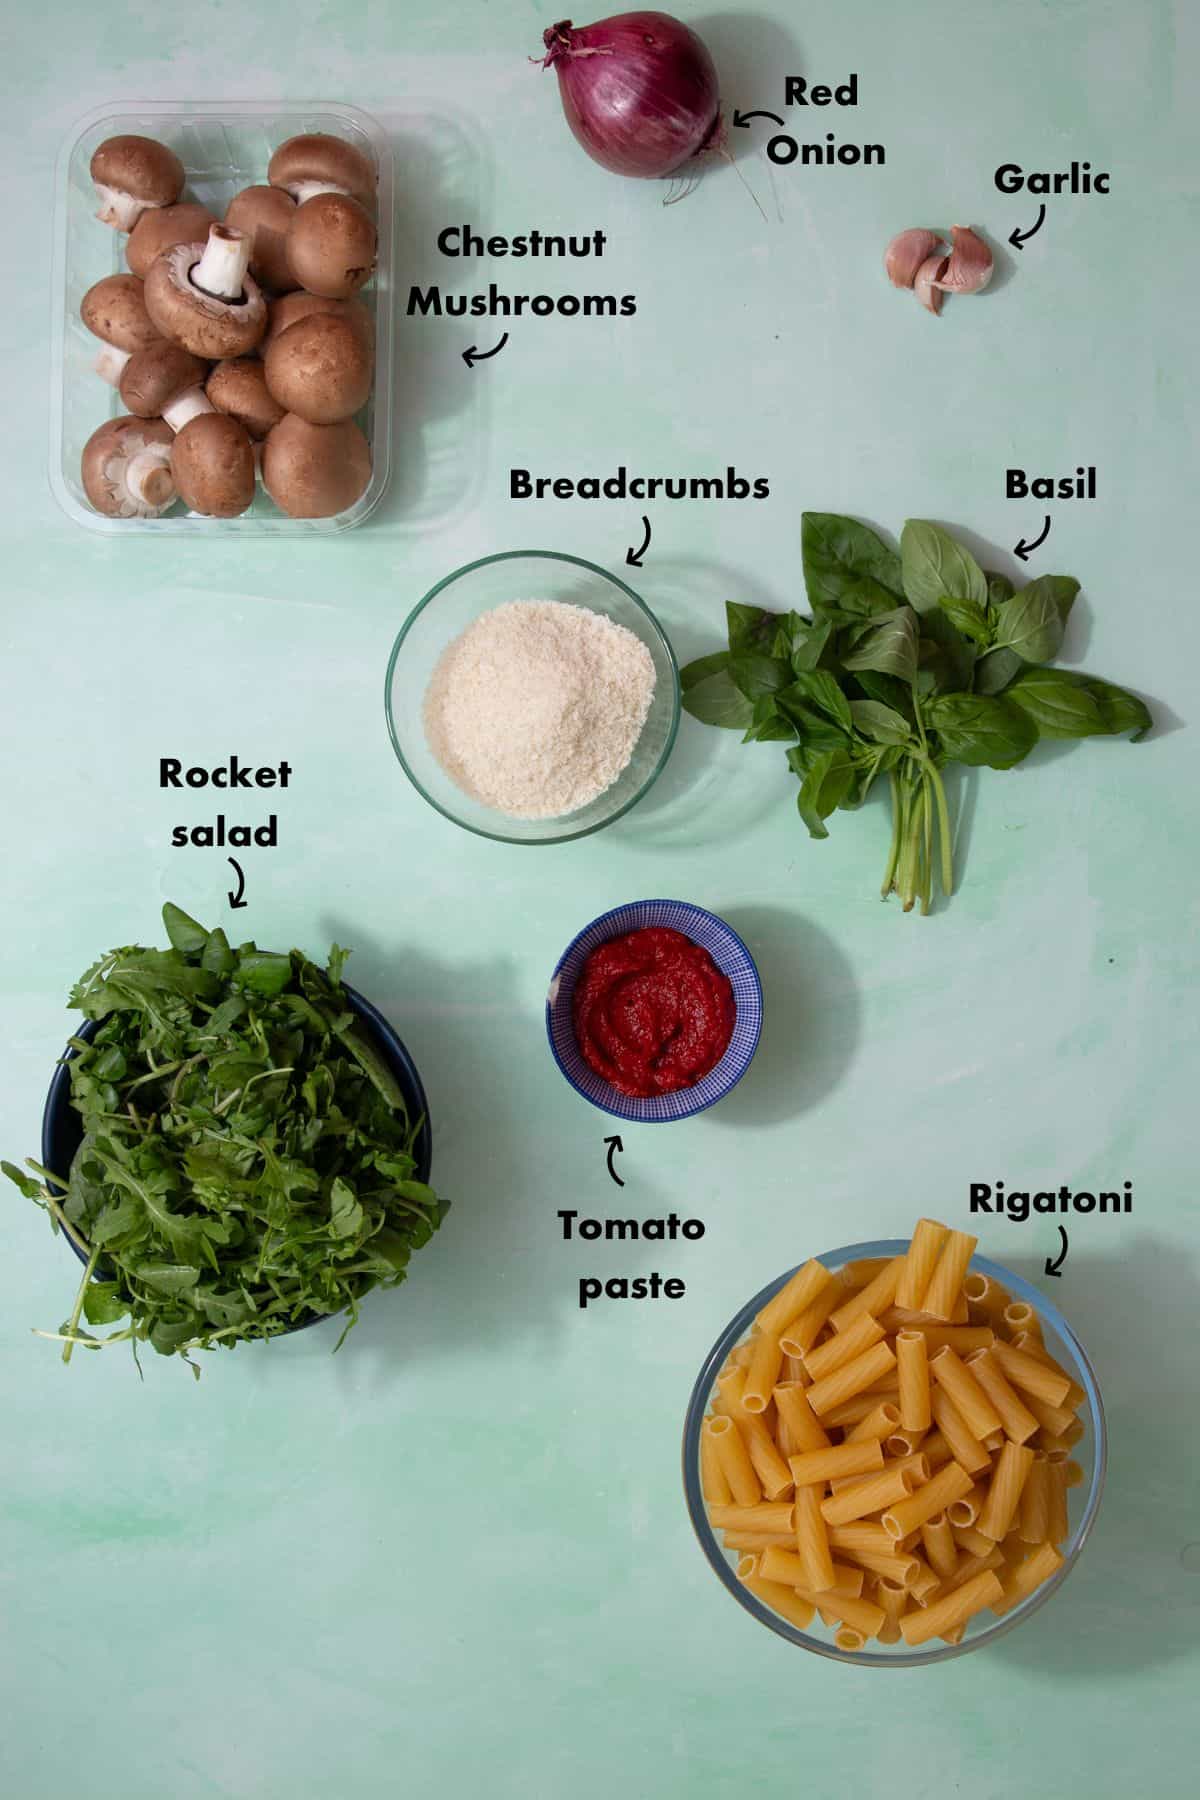 Ingredients to make mushrooms with rigatoni laid out on a pale blue background and labelled.